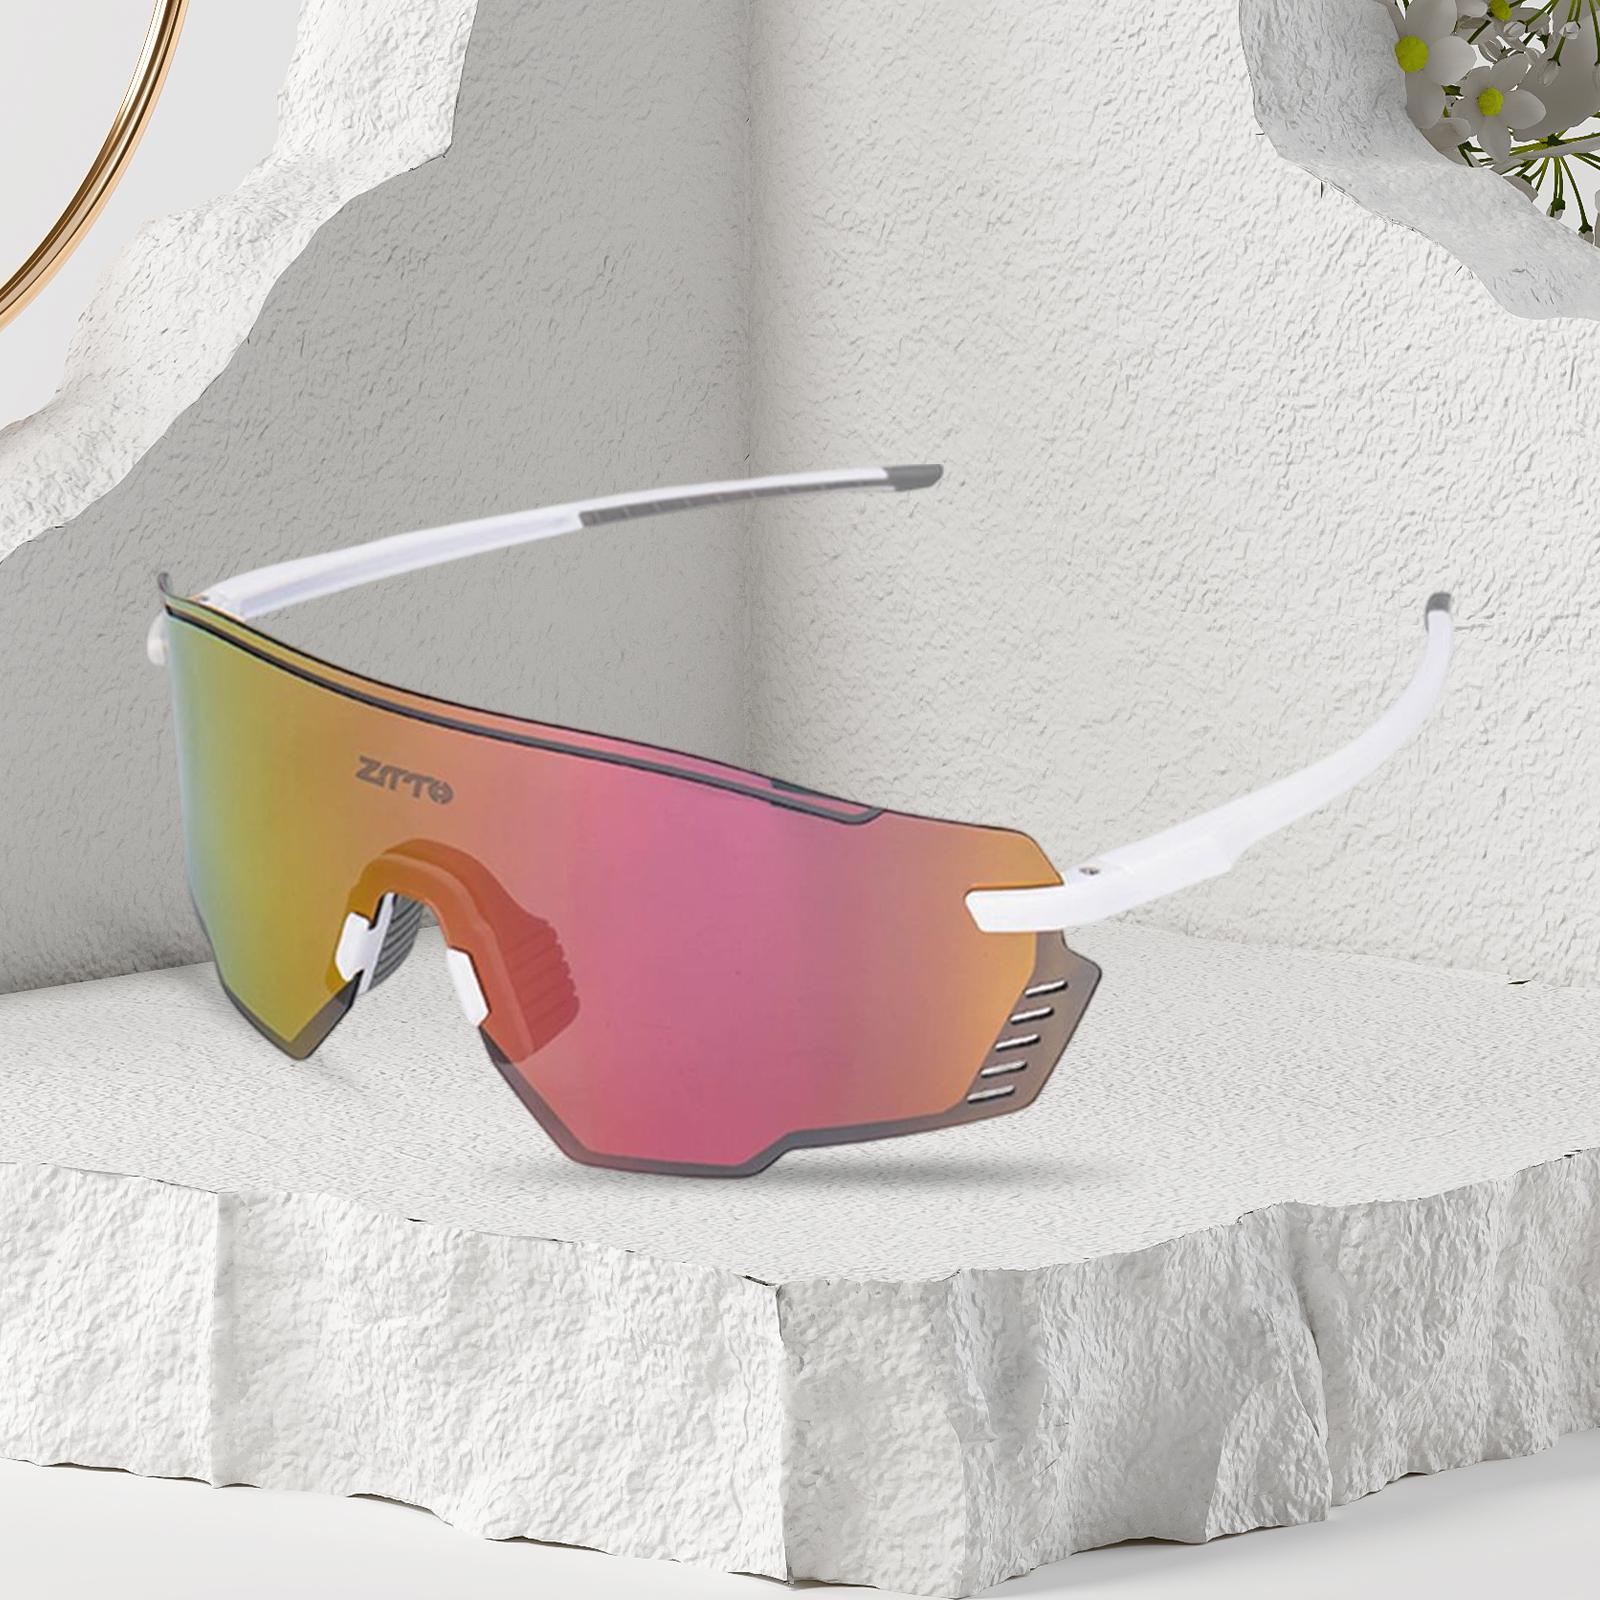 Outdoor Cycling Glasses Sports Sunglasses Eye Protection for Fishing Hiking White Pink